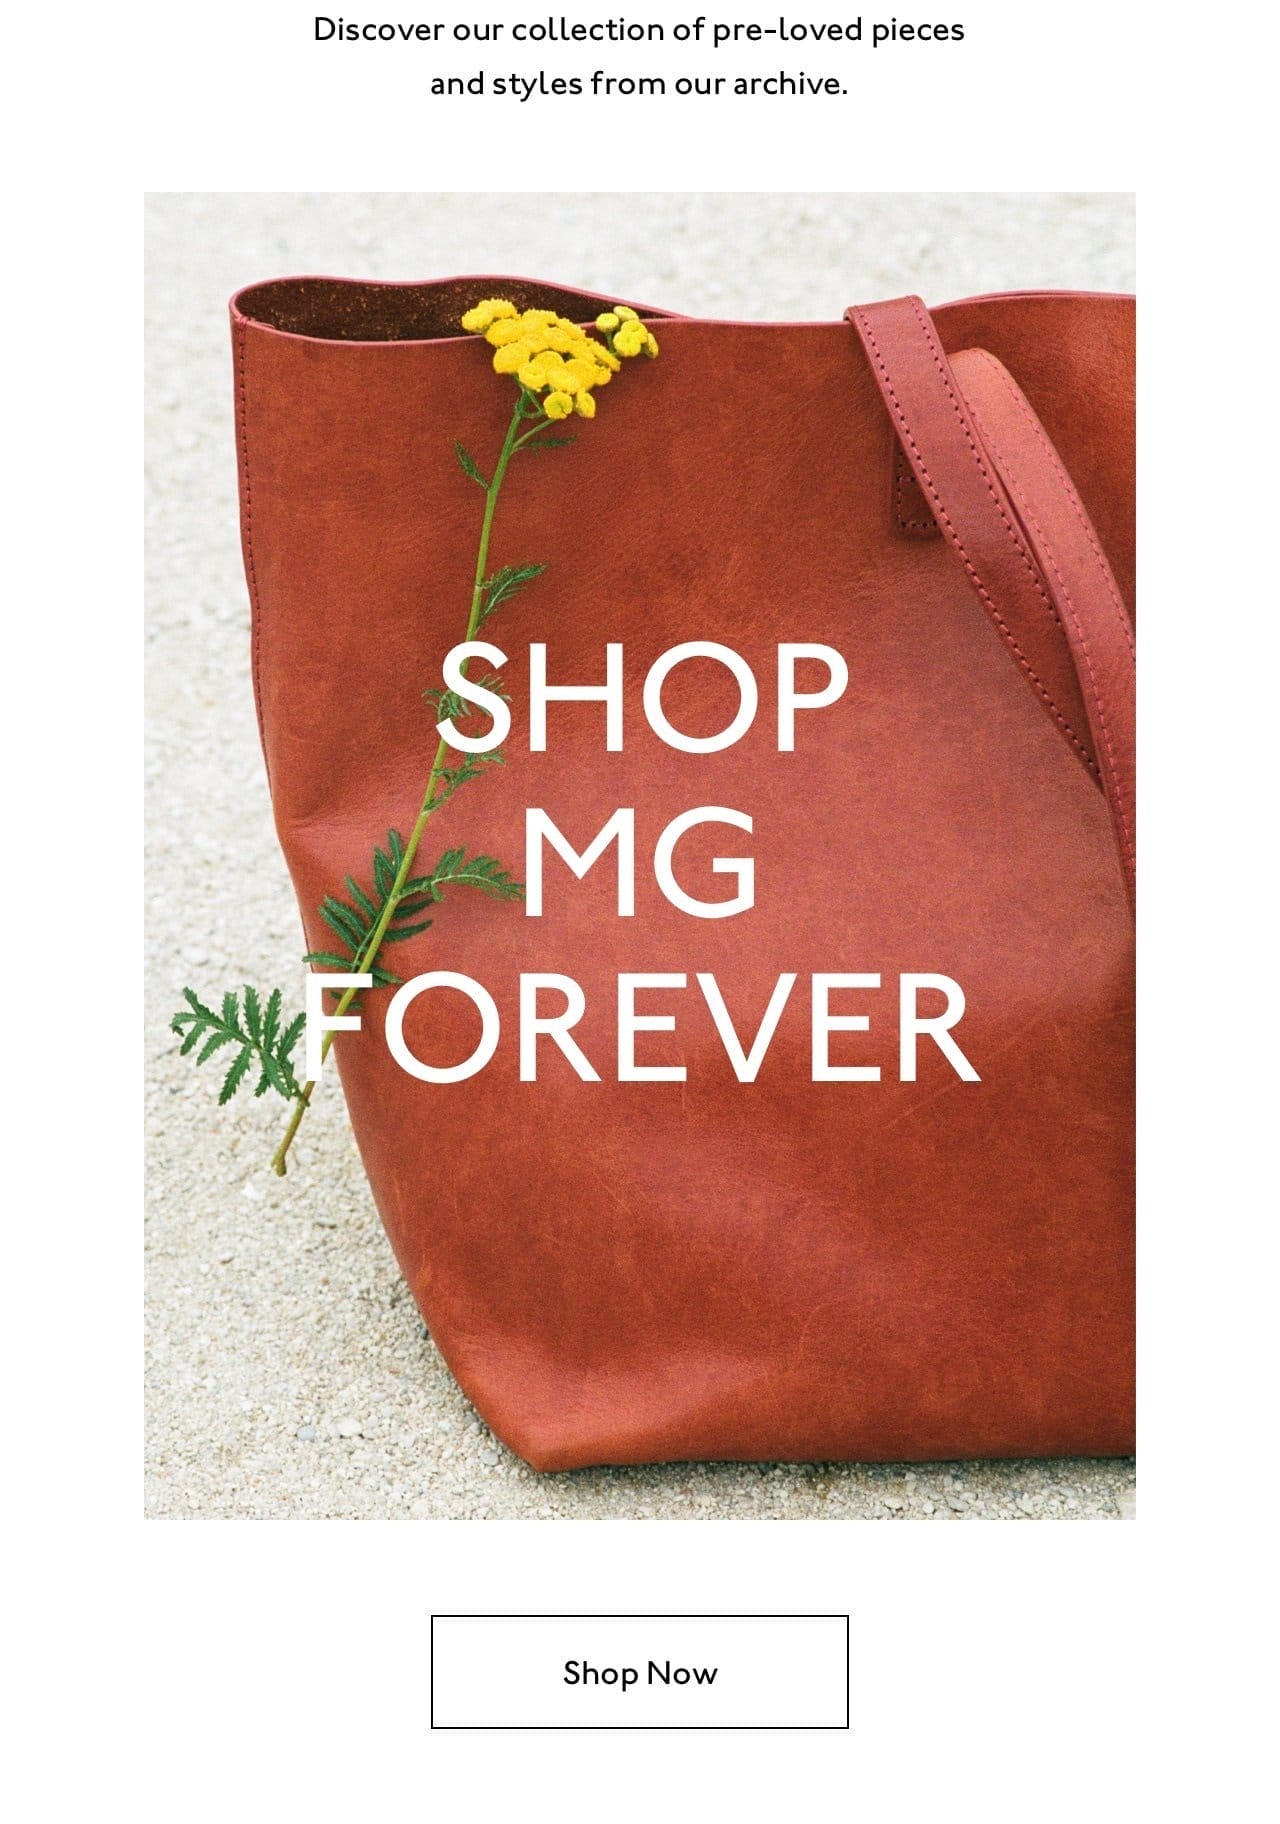 Discover our collection of pre-loved pieces and styles from our archive at MG Forever. Shop now.